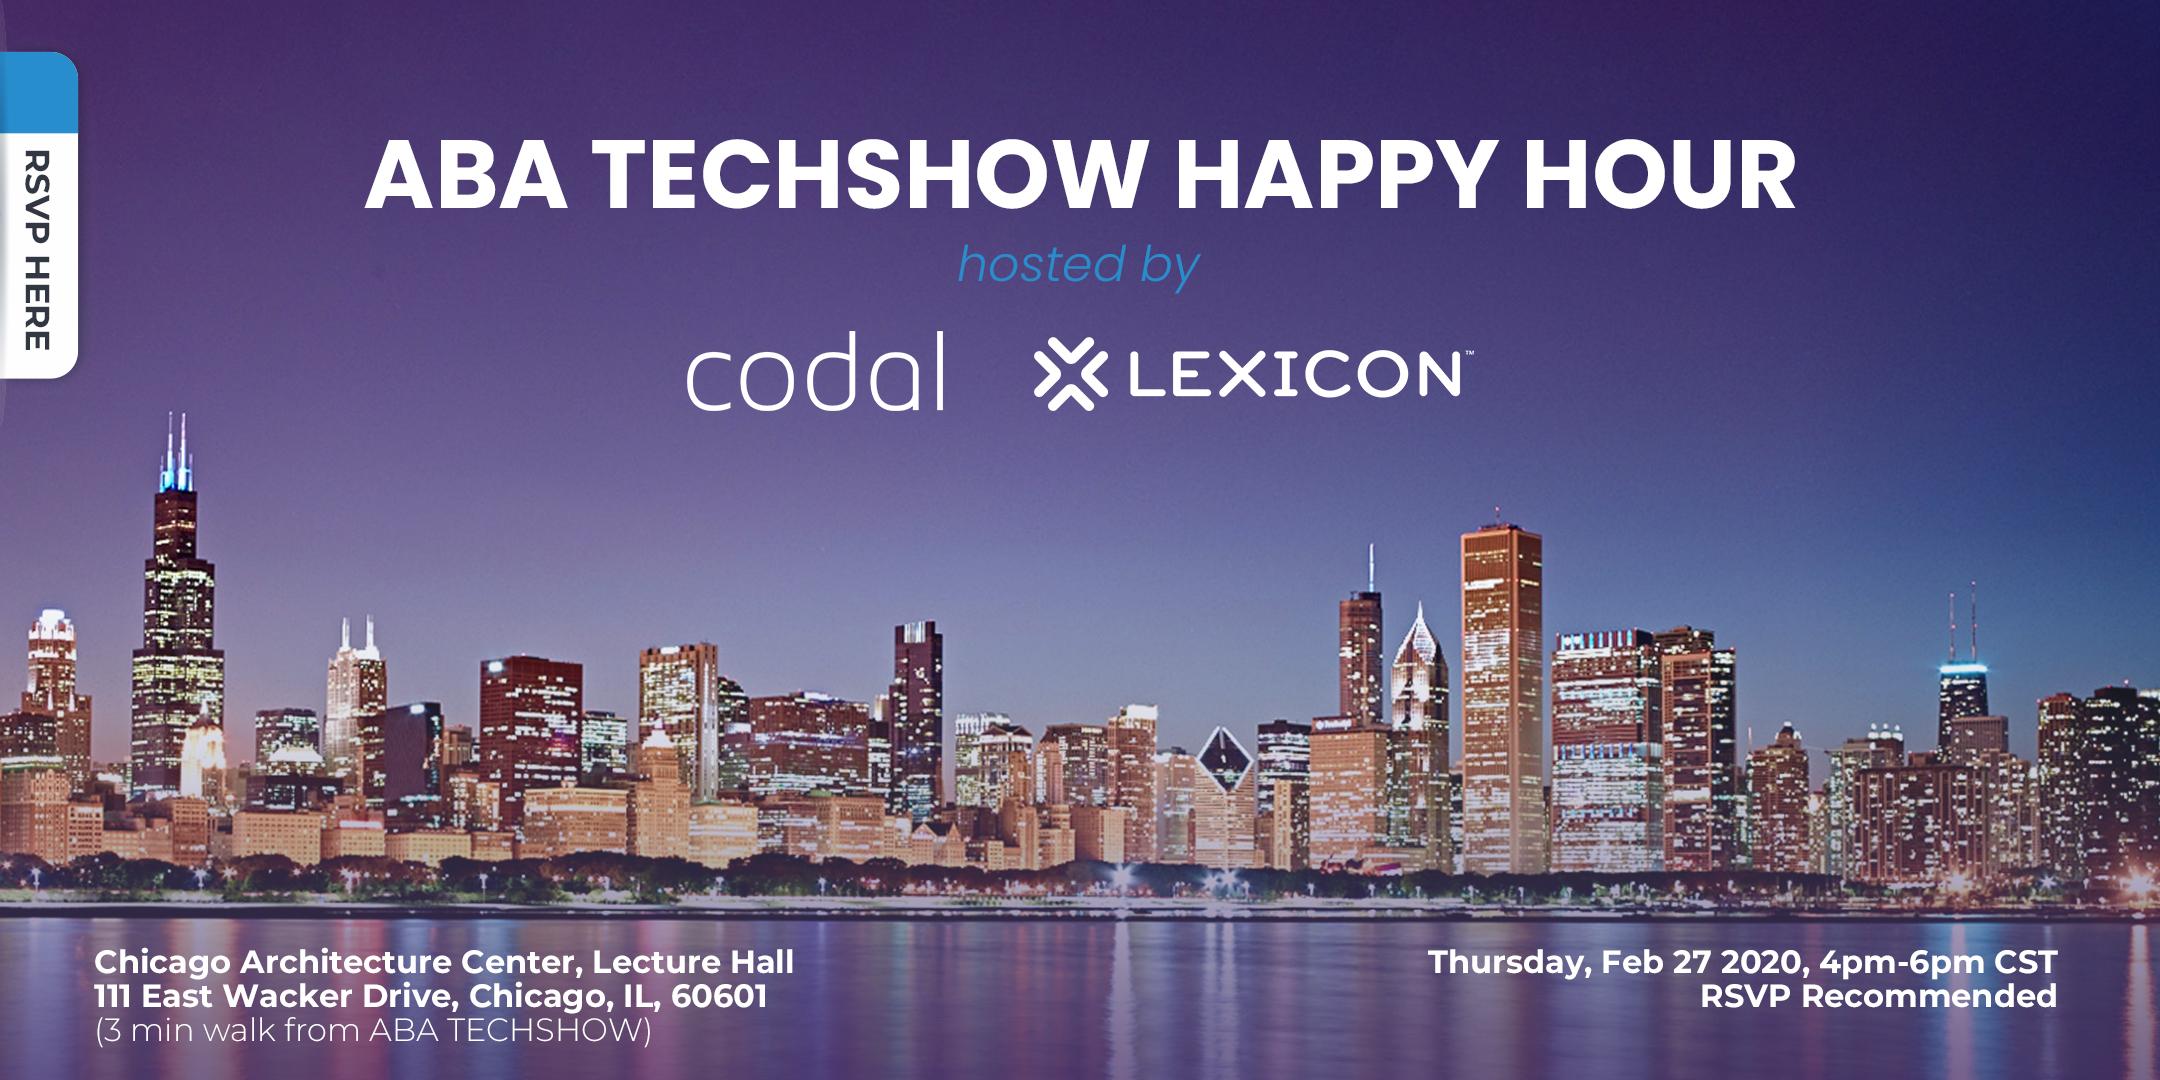 ABA TECHSHOW 2020 Happy Hour hosted by Codal and Lexicon